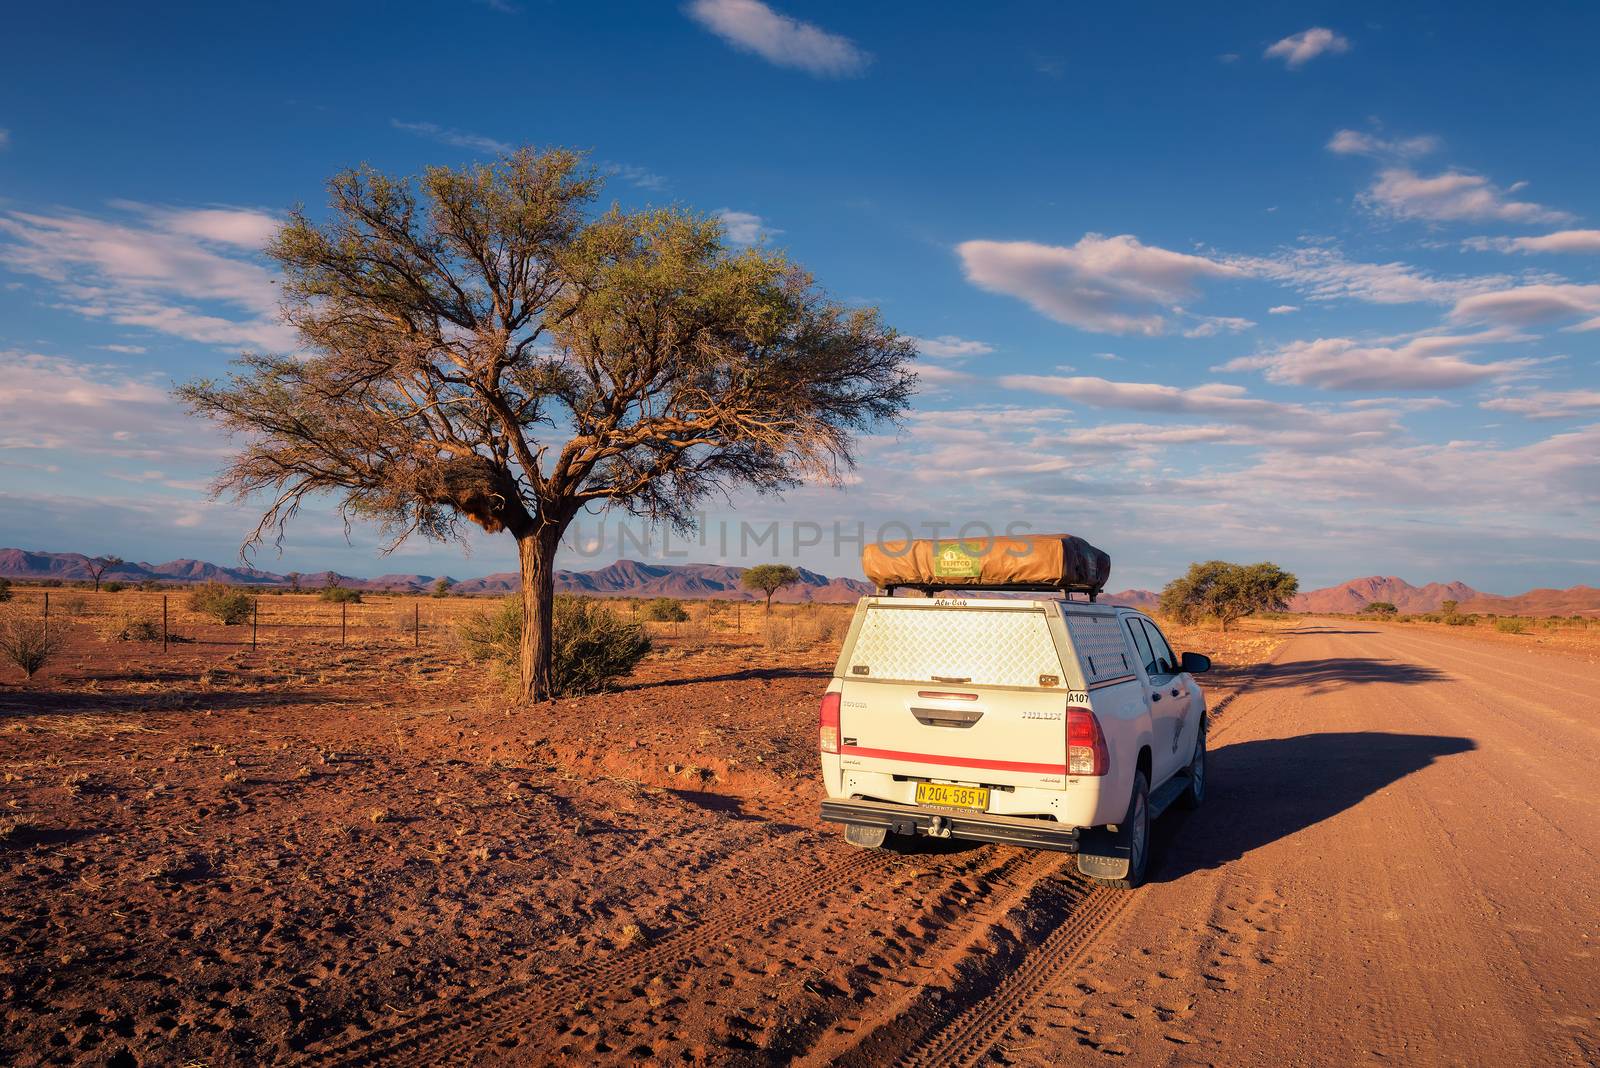 4x4 rental car equipped with a roof tent driving on a dirt road in Namibia by nickfox